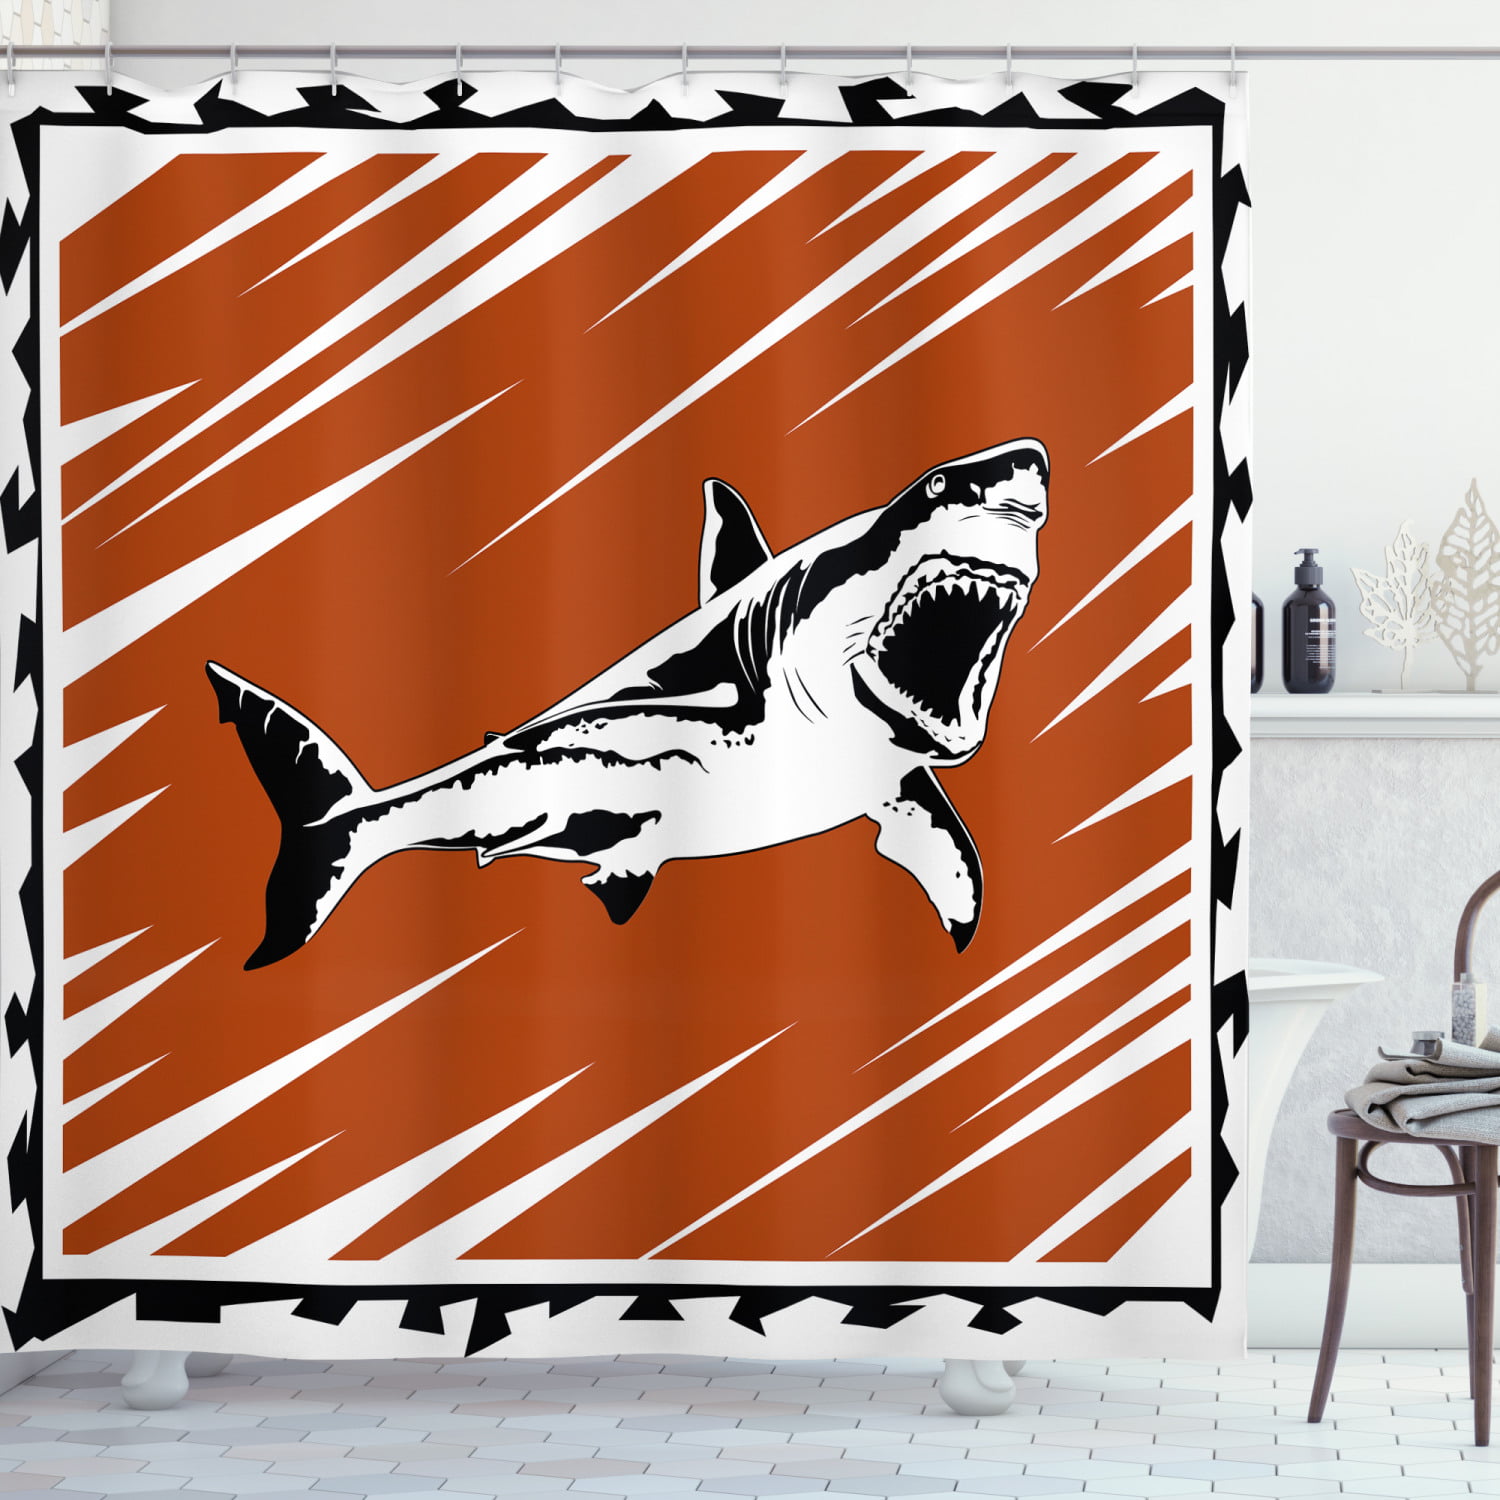 Shark Great White Mammel Sea Fish Bathroom Wall Art Decal Sticker Picture Poster